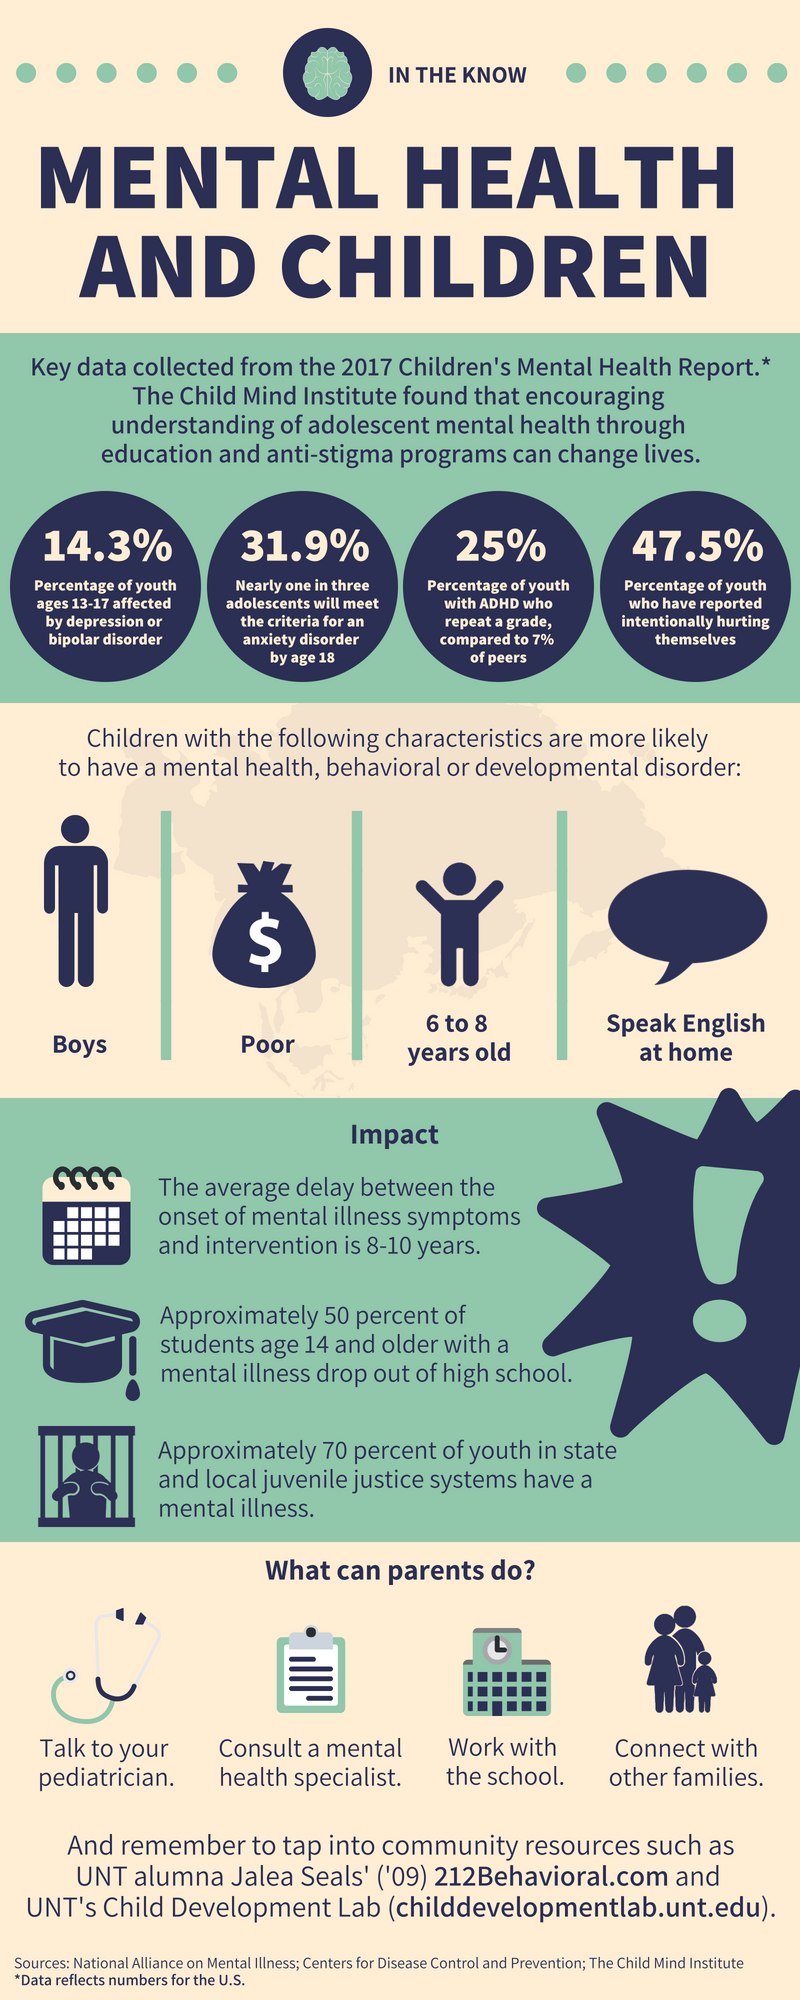 Mental Health and Children infographic click for a long description